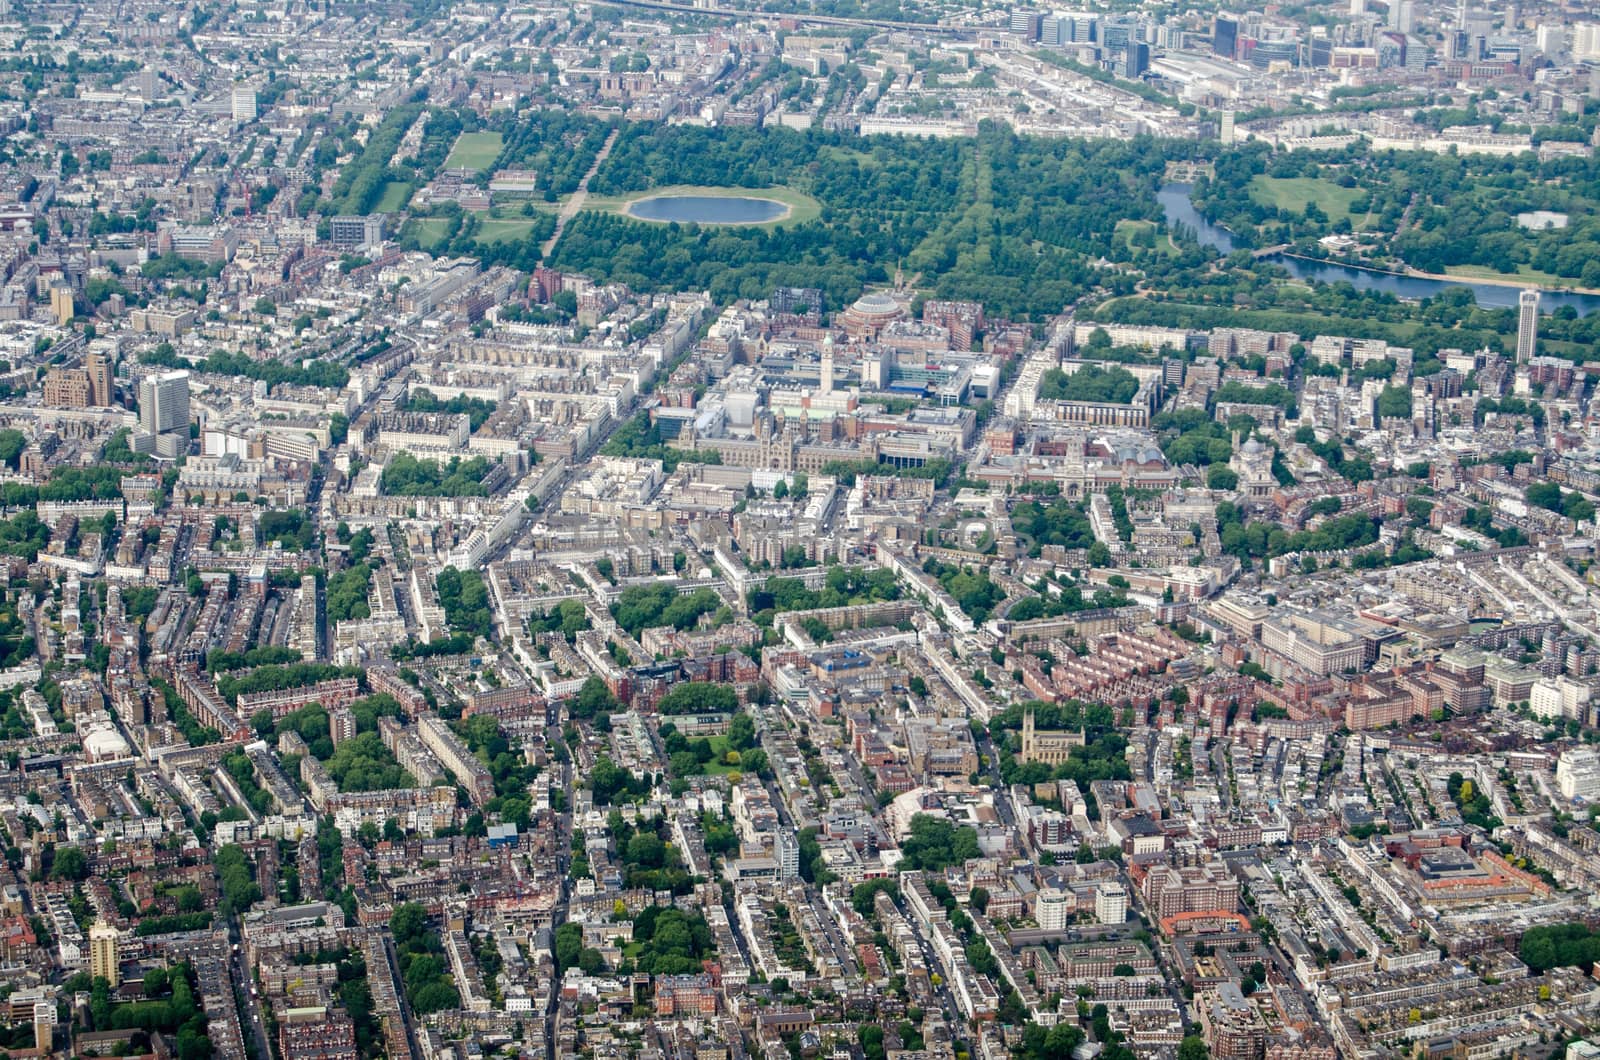 Aerial view looking north across South Kensington, Albertopolis and Hyde Park in central London on a sunny morning.  